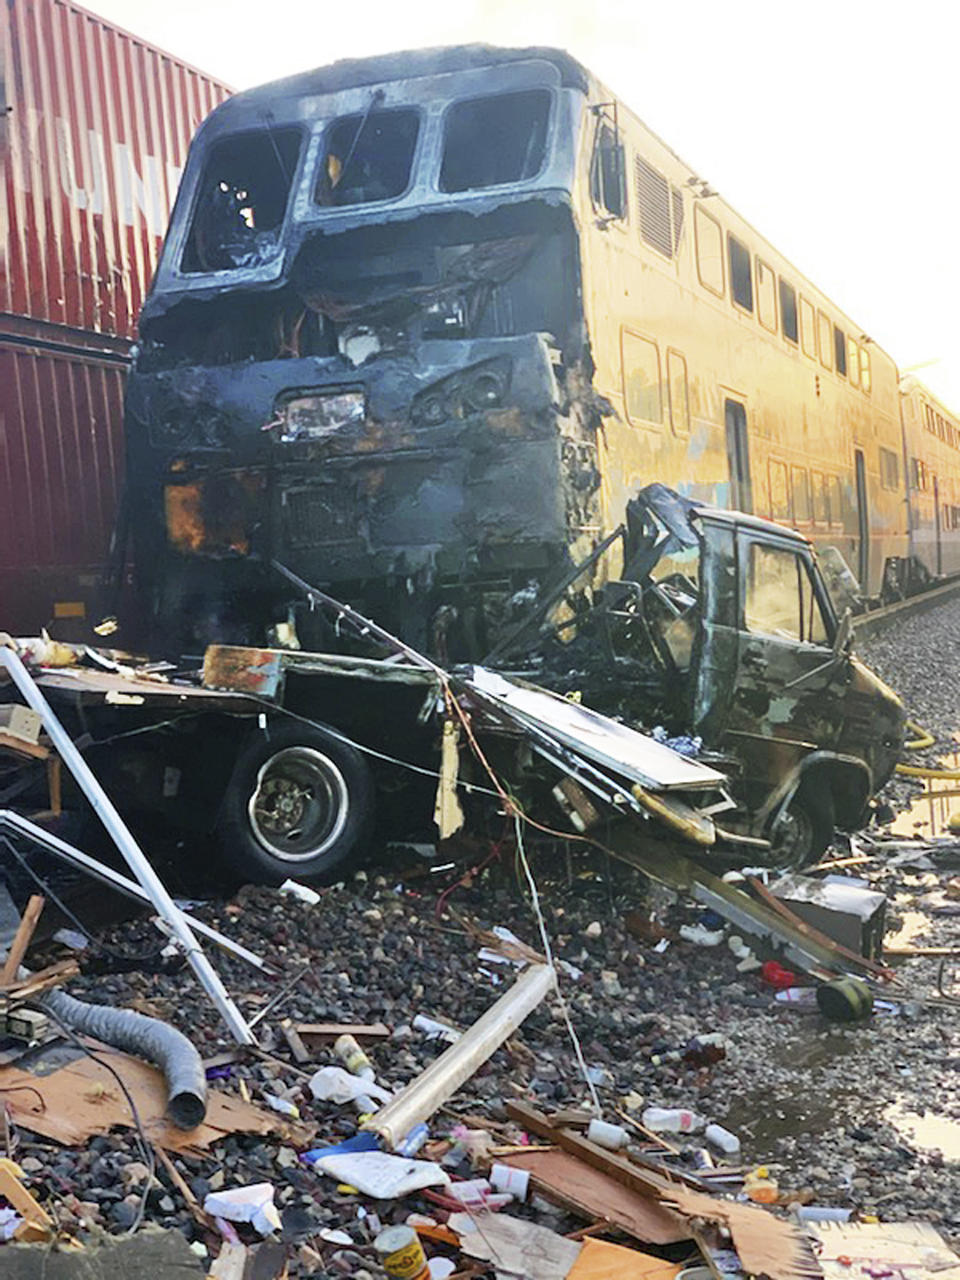 This photo provided by the Norwalk Sheriff's Station shows first responders at the scene after an RV was hit by a commuter train and burst into flames along a track in Santa Fe Springs, Calif., Friday, Nov. 22, 2019. Authorities say the collision occurred shortly after 5:30 a.m. Friday at an intersection in an industrial area of Santa Fe Springs. There were no immediate reports of injuries. All passengers on the Metrolink train were safely evacuated. (Norwalk Sheriff's Station via AP)